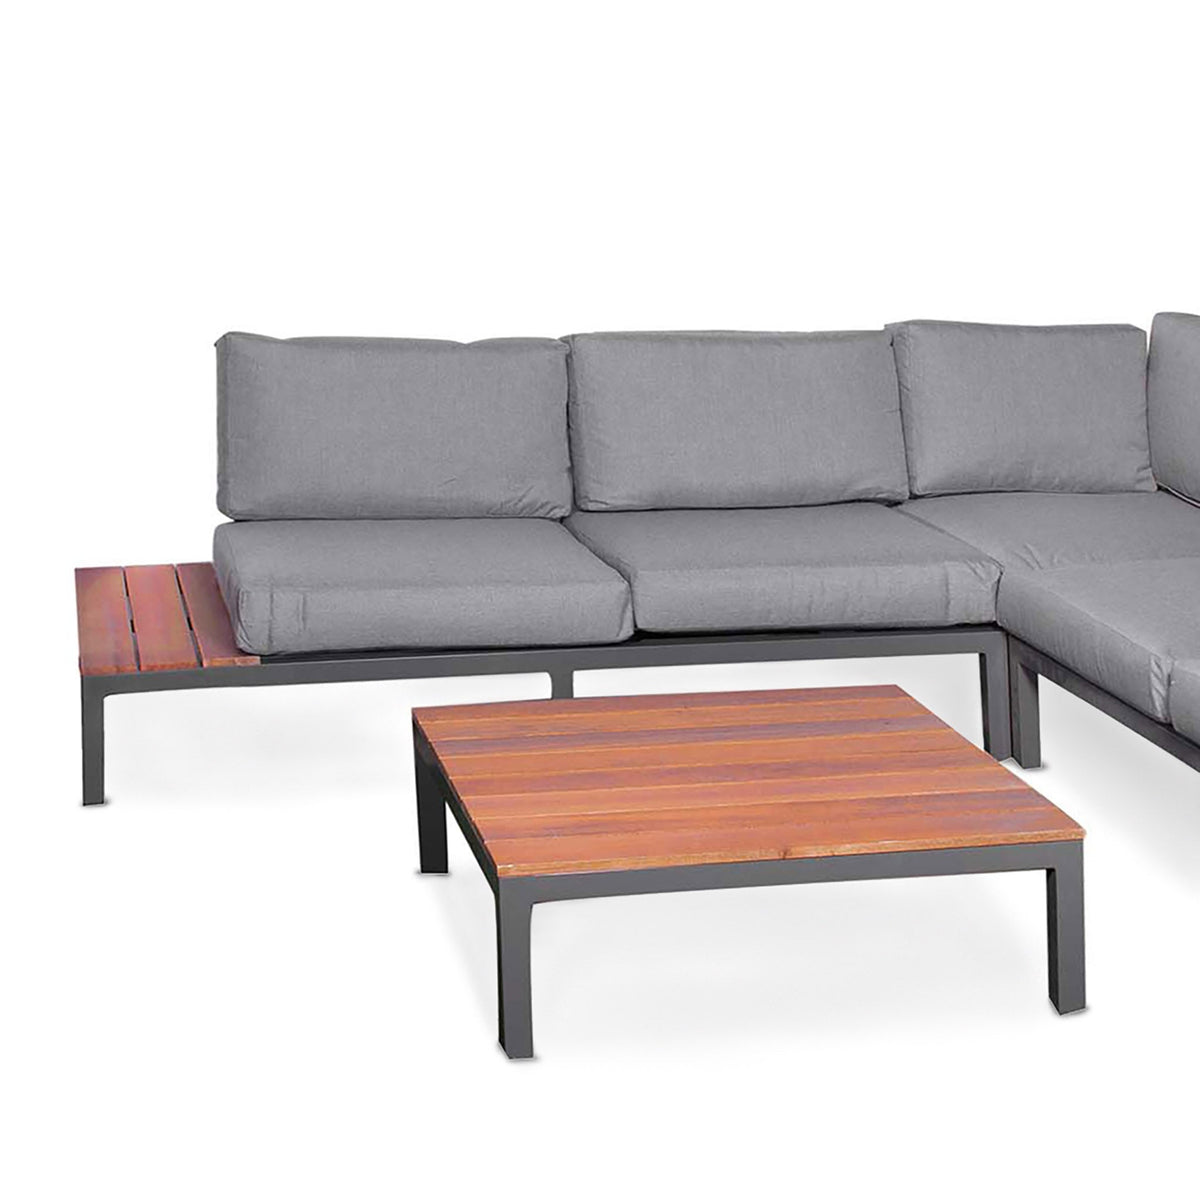 Aspen Garden Lounge Set with Teak Coffee & Side Tables close up of weather proof cushions